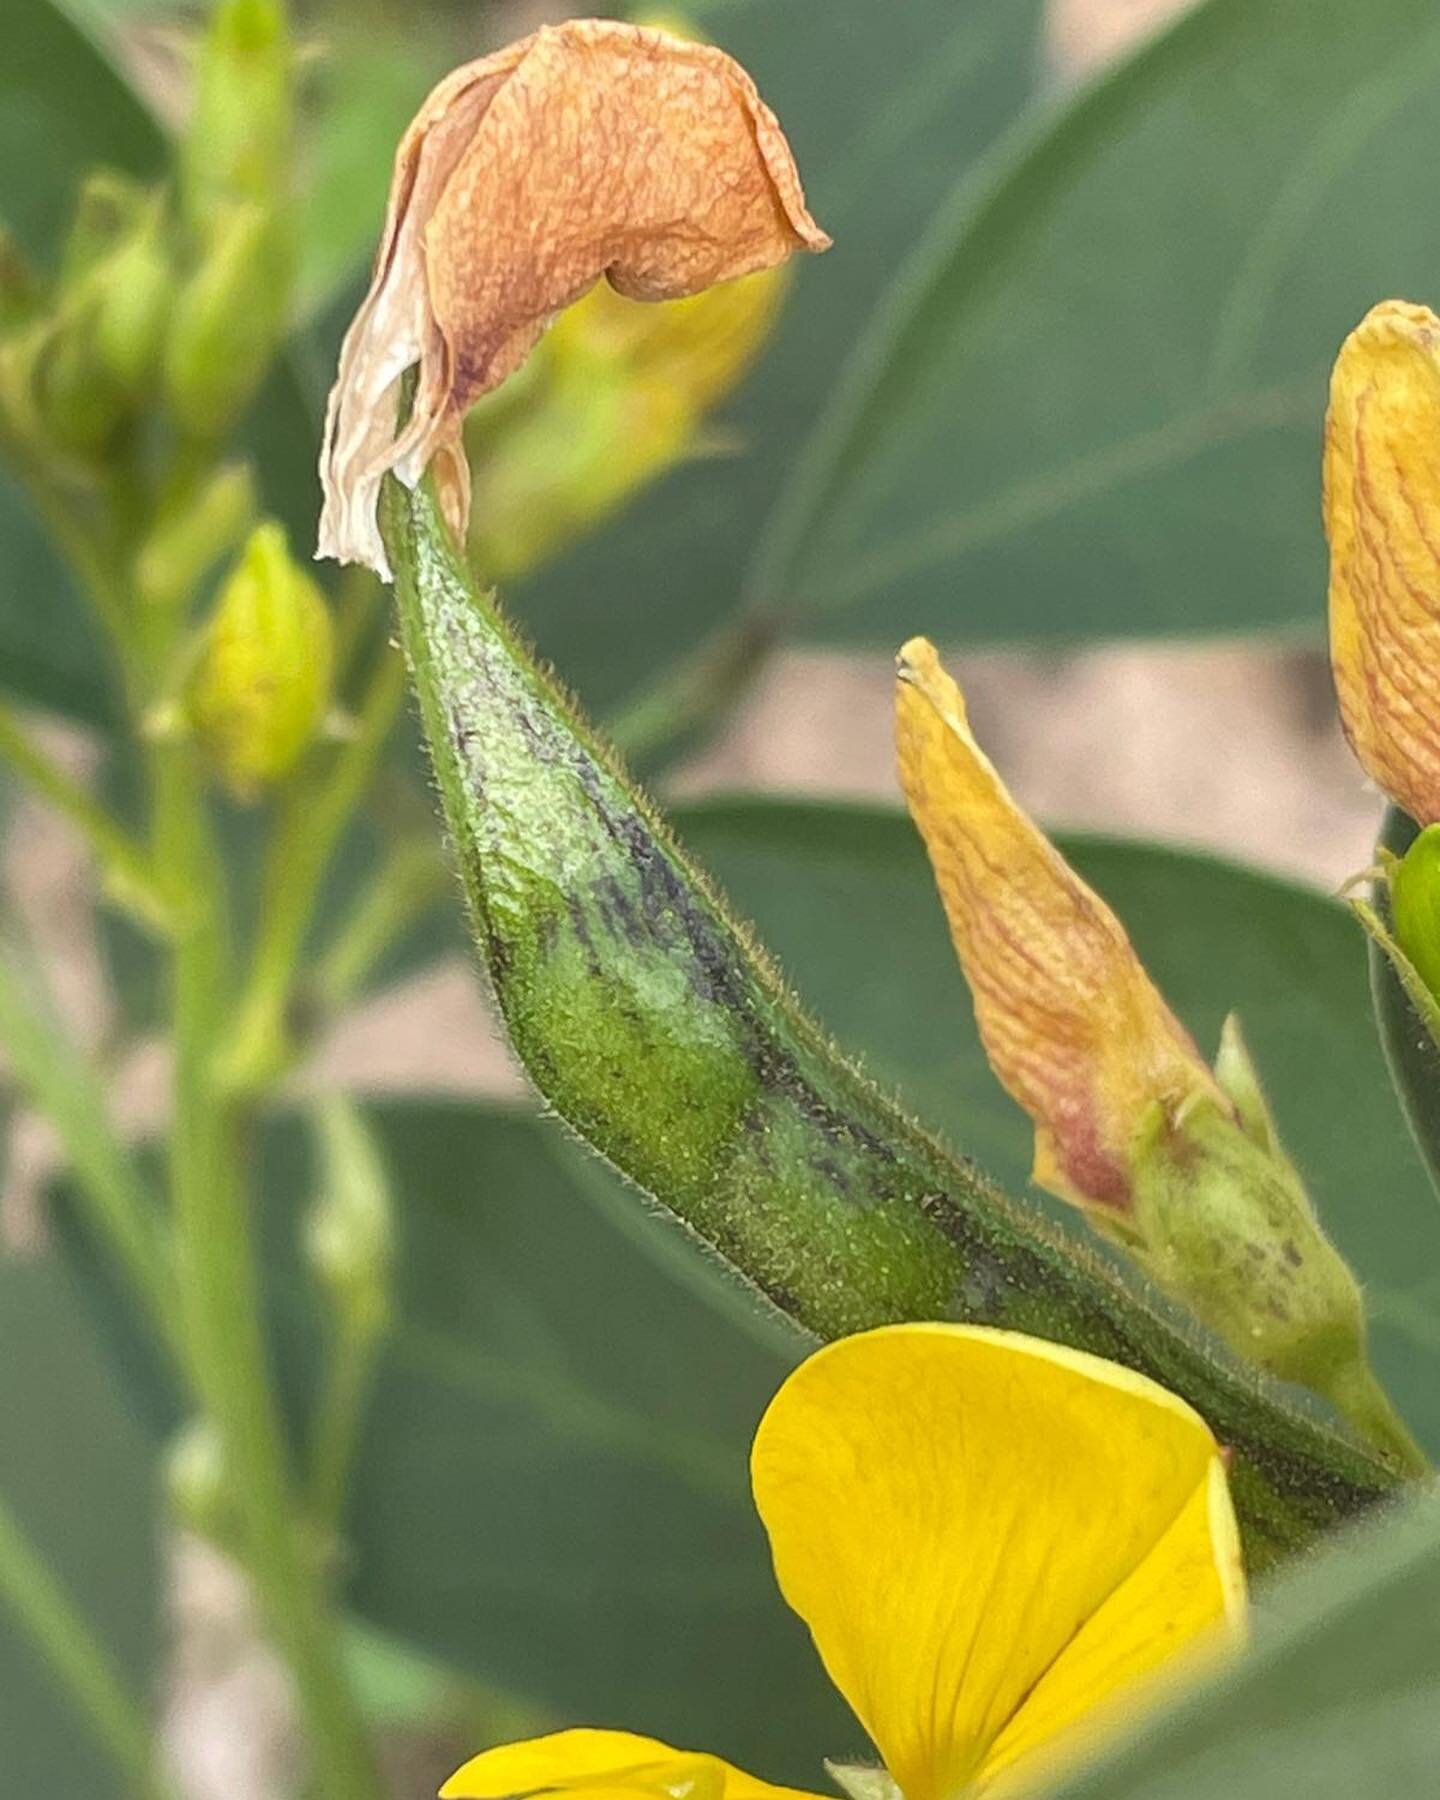 Drought resistant peas? Seems horribly timely as even though we&rsquo;ve had a splash of rain it&rsquo;s nowhere near enough. Mandy @incredible_vegetables had been experimenting with Pigeon Pea - Cajanus Cajun - a frost tender perennial whose seeds a